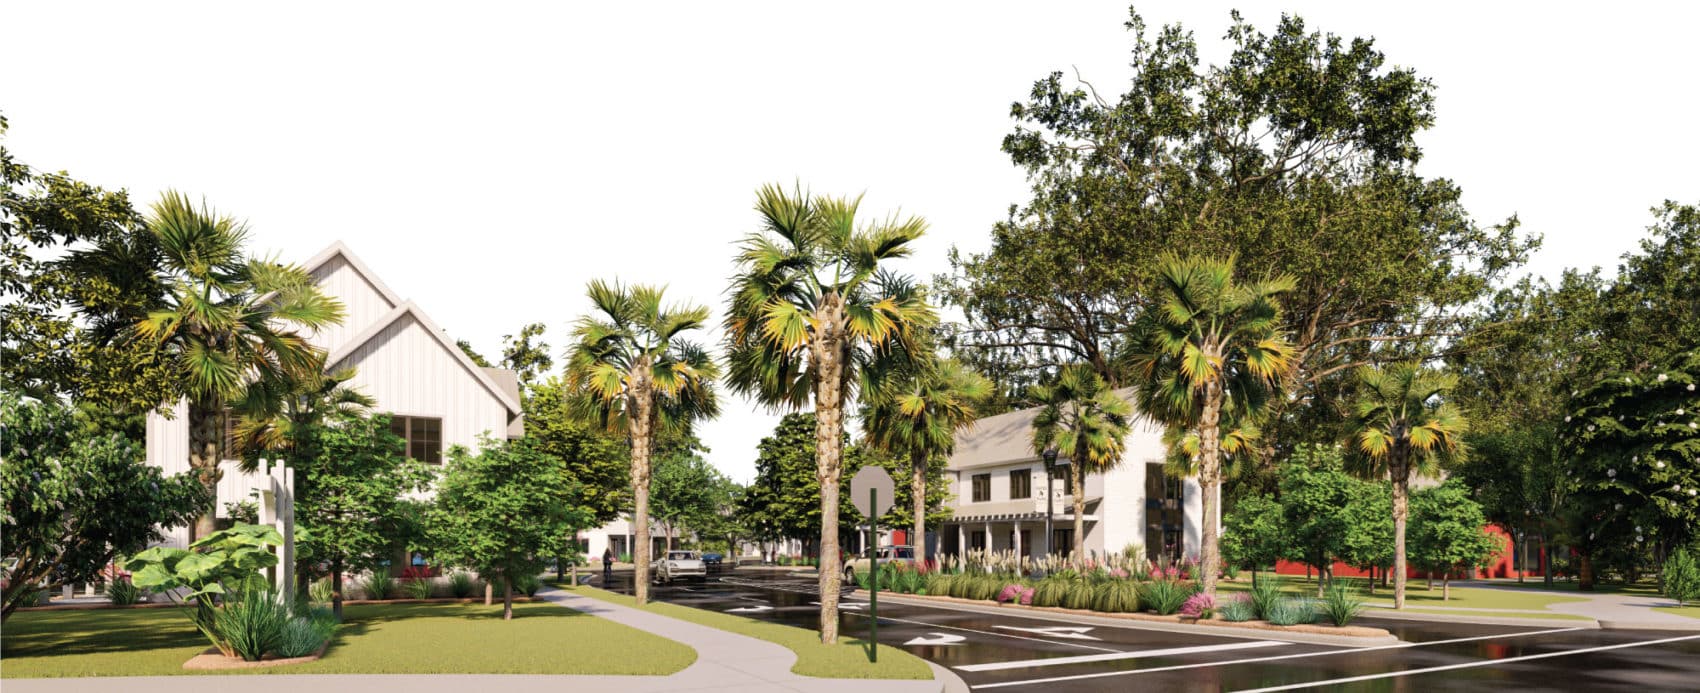 Streetscape Rendering of Hayes Park